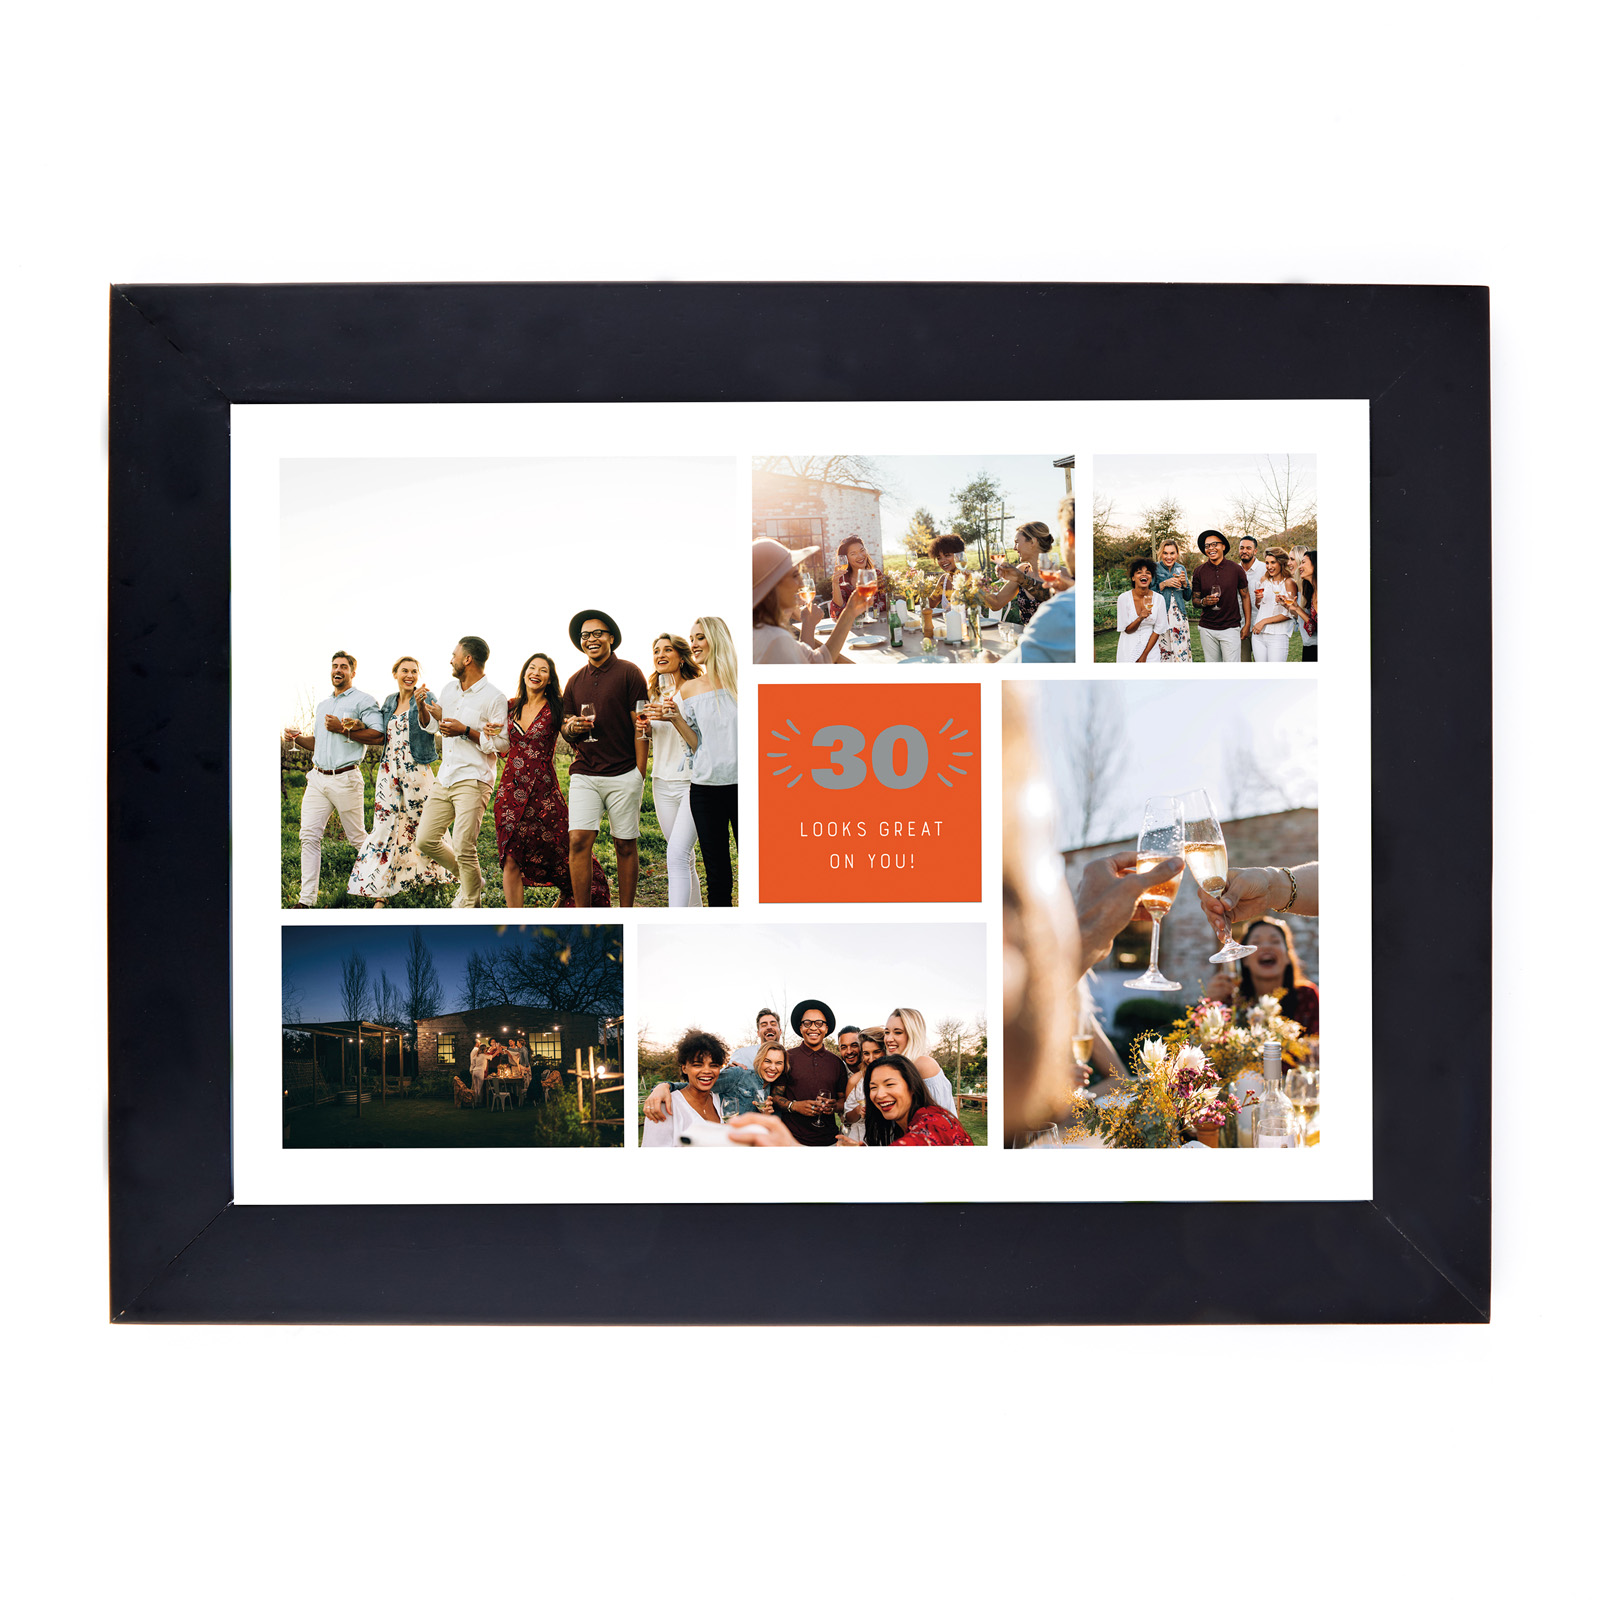 Personalised 30th Birthday Photo Print - Editable Age, Looks Great On You (Landscape)